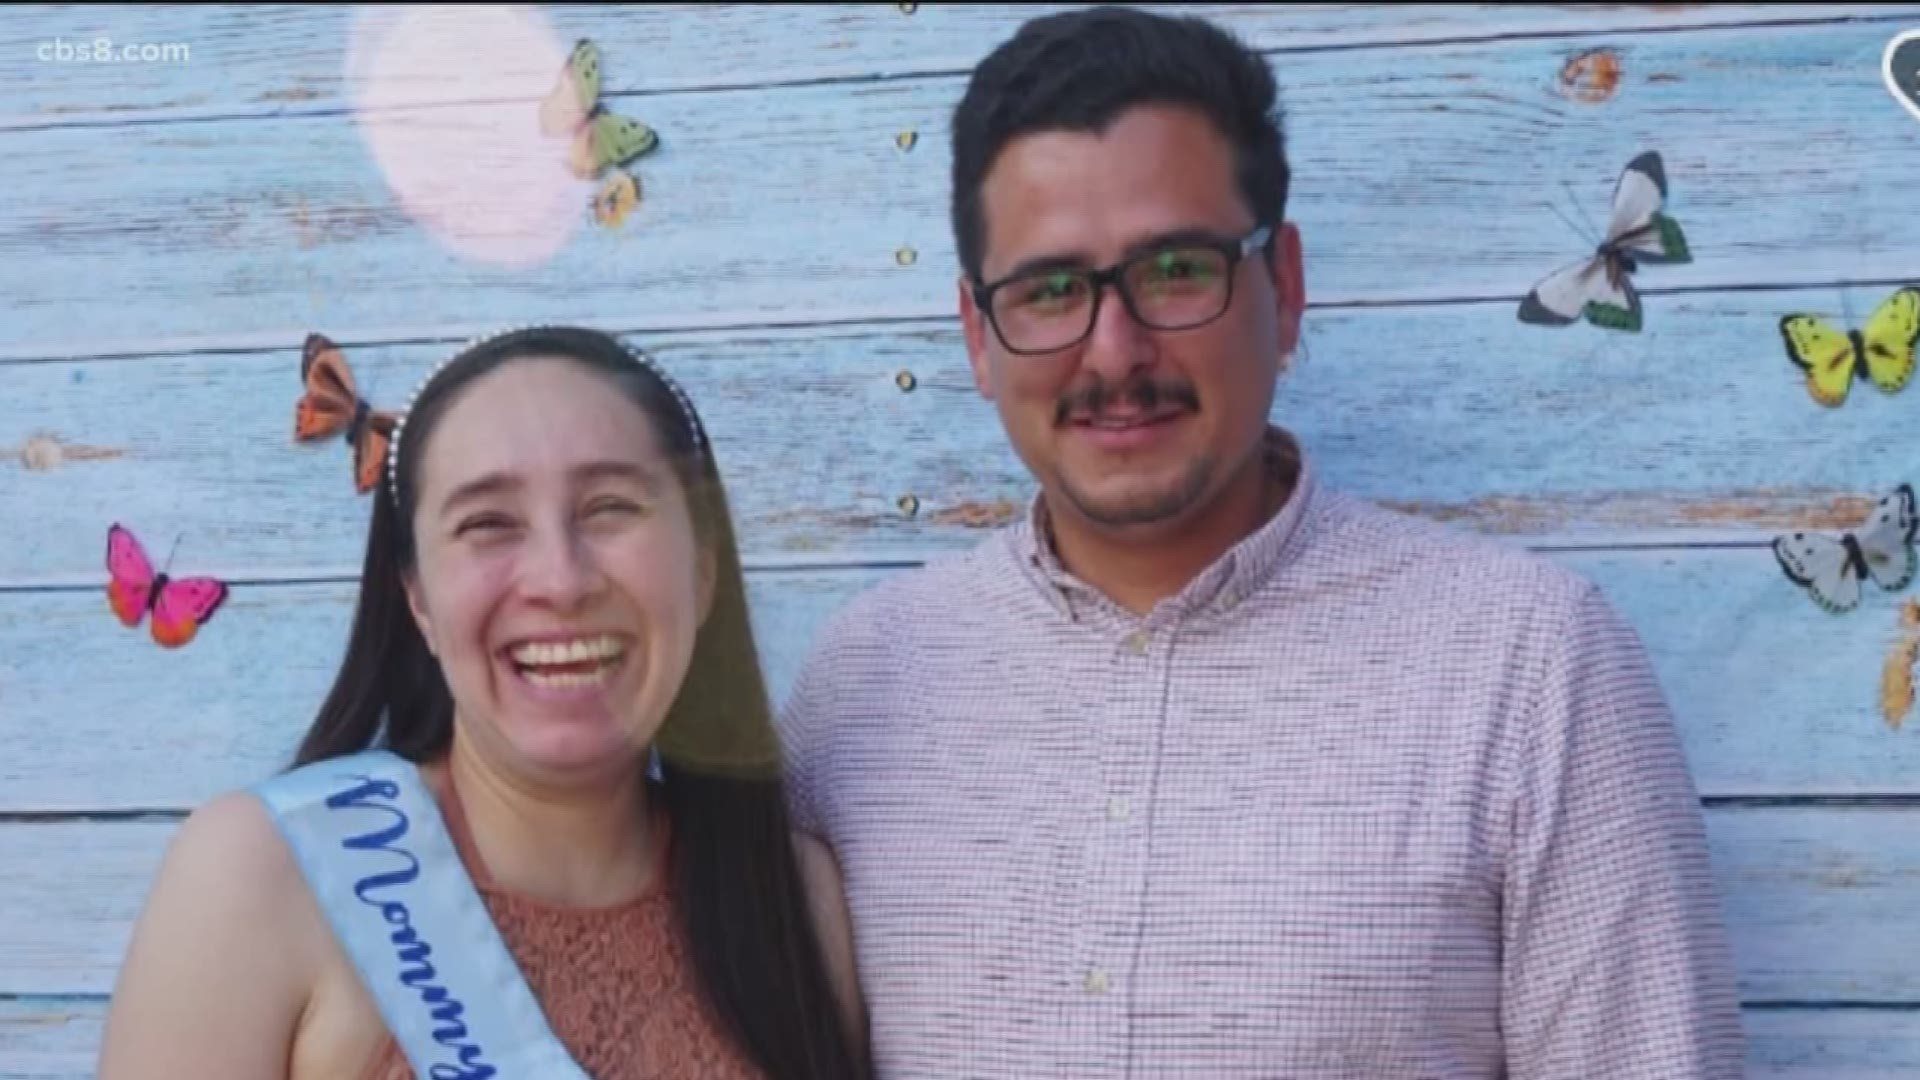 A local couple who were gunned down in the parking lot of a Chula Vista Costco remain in the hospital. The new parents, Angelina Perez and Sam Valdez are still in intensive care after being shot multiple times.